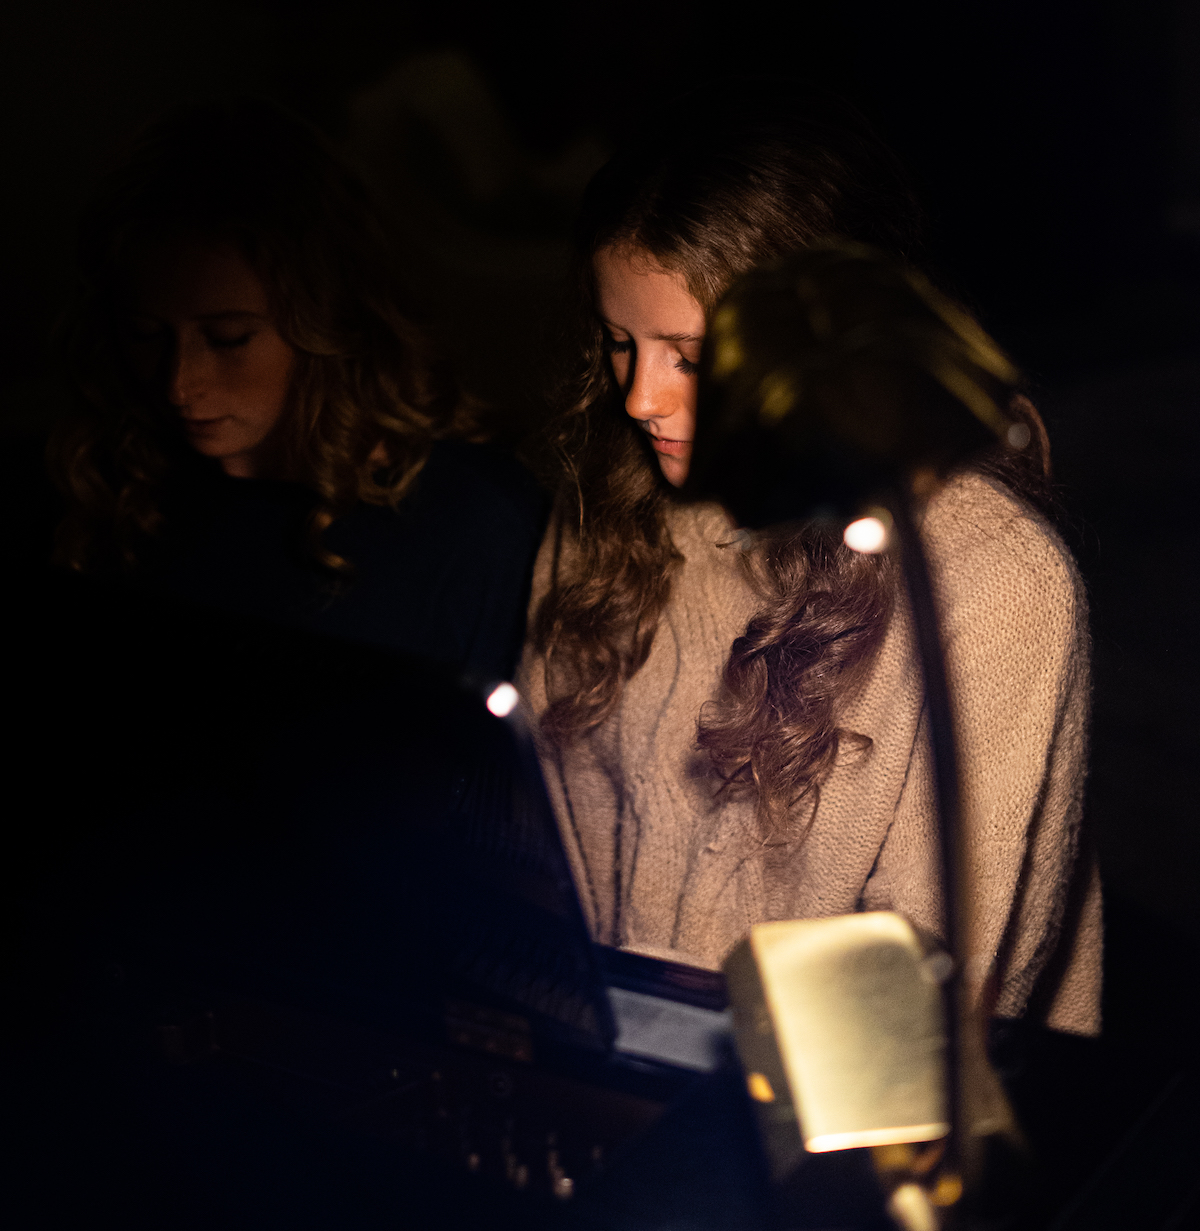 Two young women seated at the piano in the golden glow of firelight